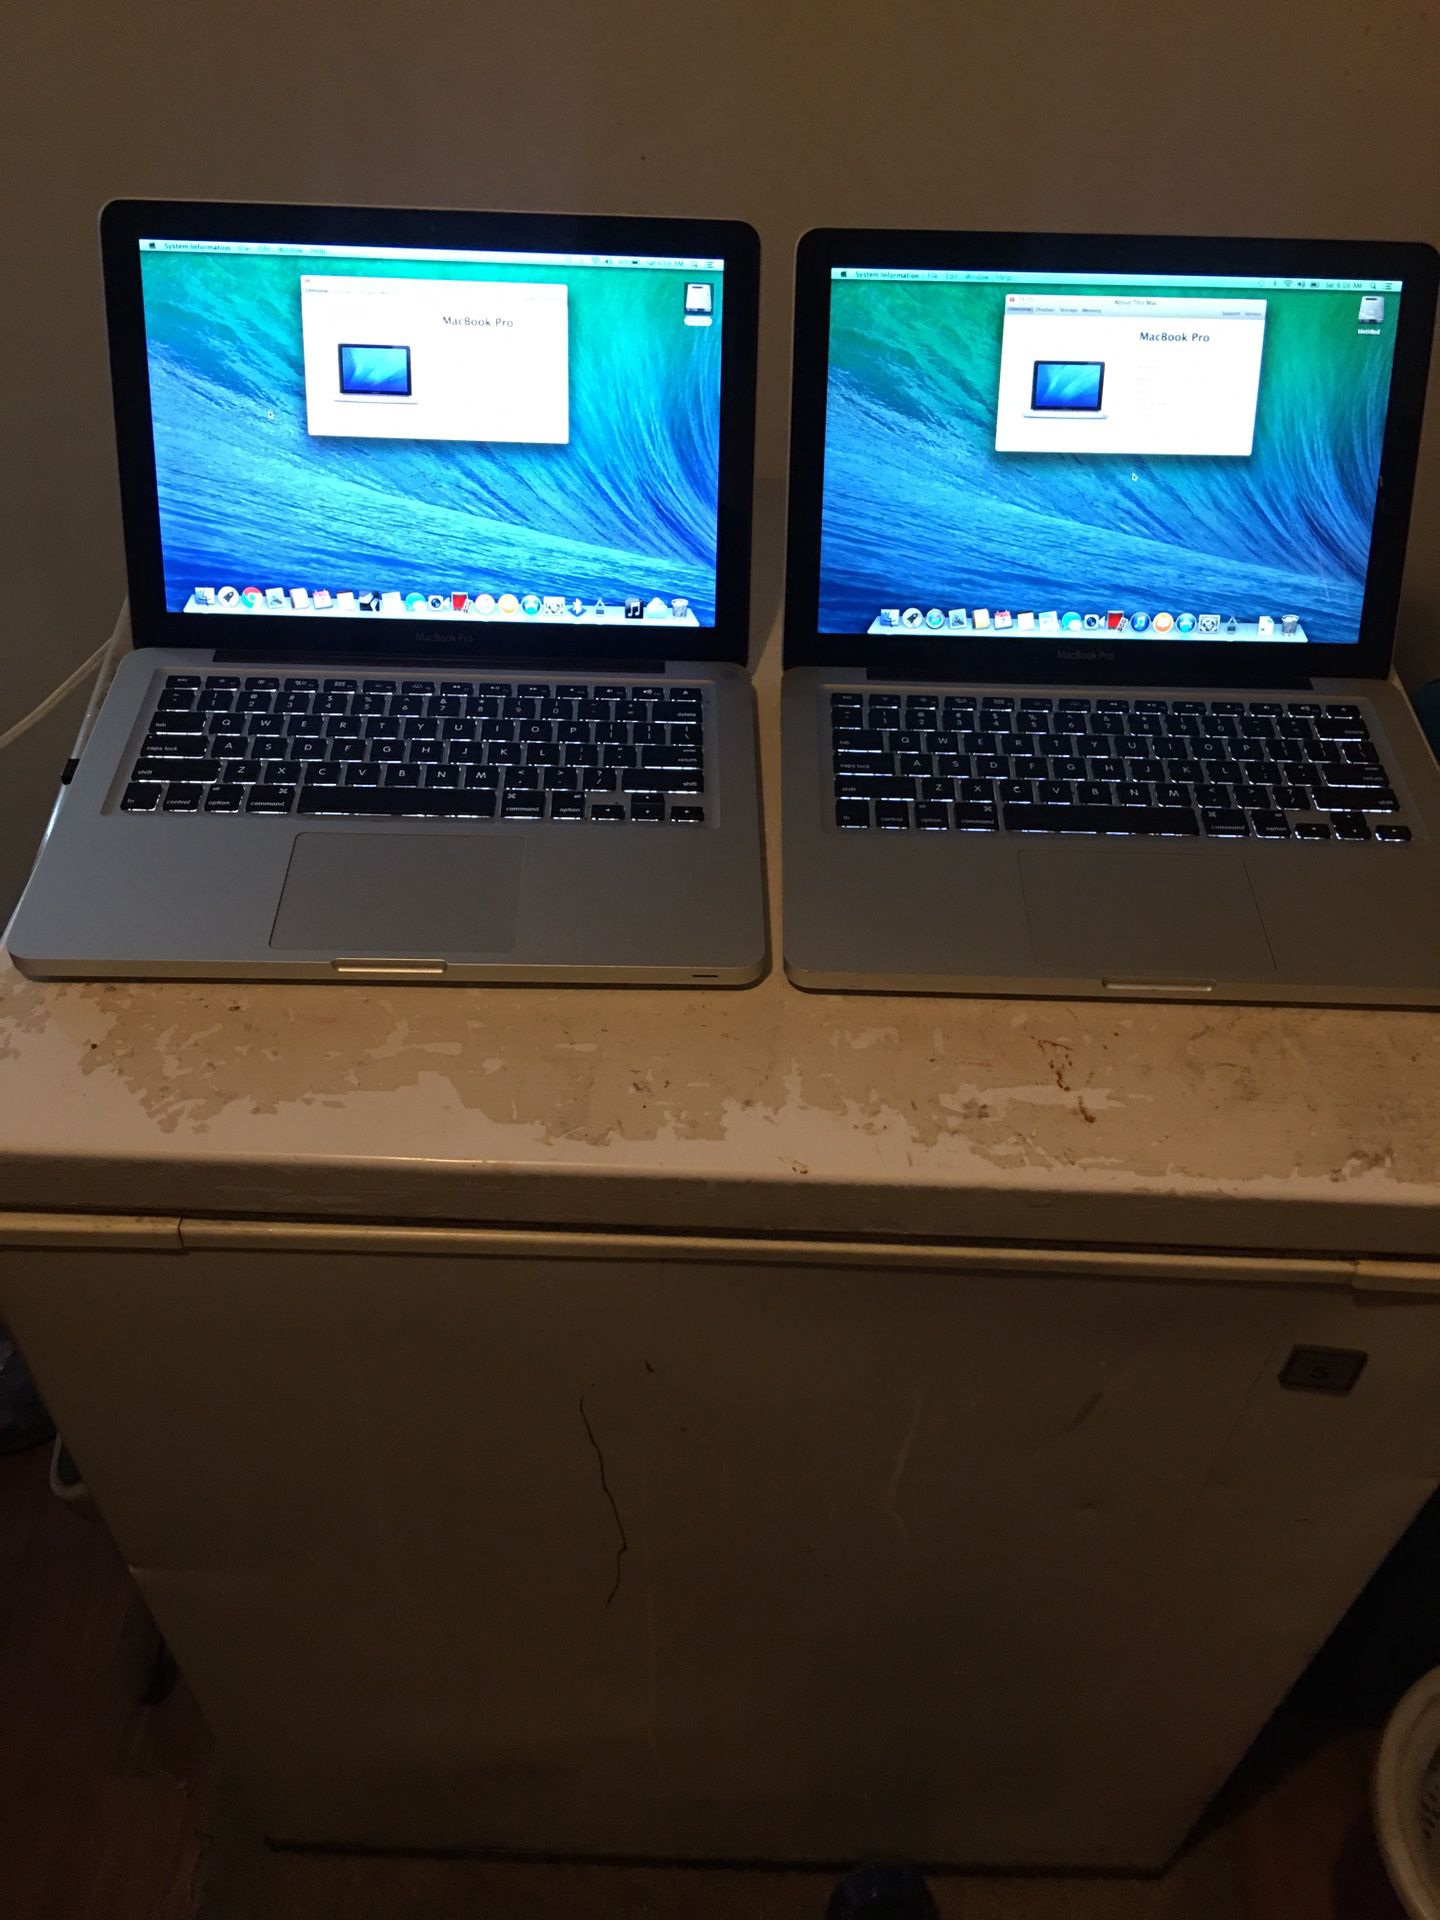 2 UNLOCKED Mid 2012 13 inch MacBook Pro i5/4gb/500gb with Final Cut Pro X, Studio One, Parallel desktops with Windows 7. And More